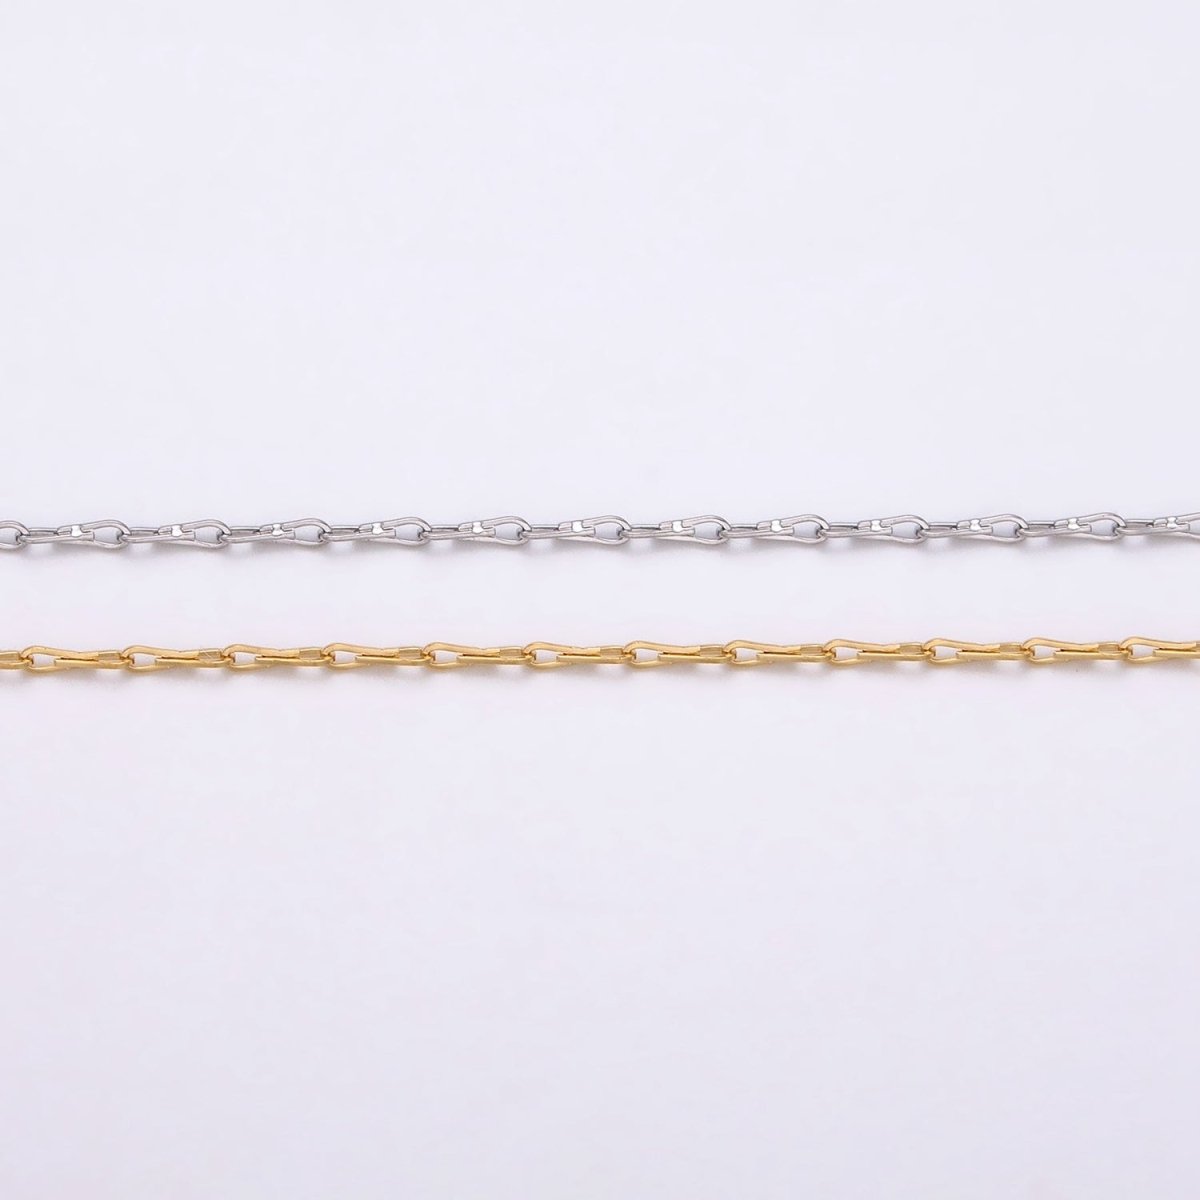 Ladder Hook Horse Shoe Chain 1.1mm Unfinished Chain by Yard Unique Horseshoe Link Chain | ROLL-1327 Clearance Pricing - DLUXCA